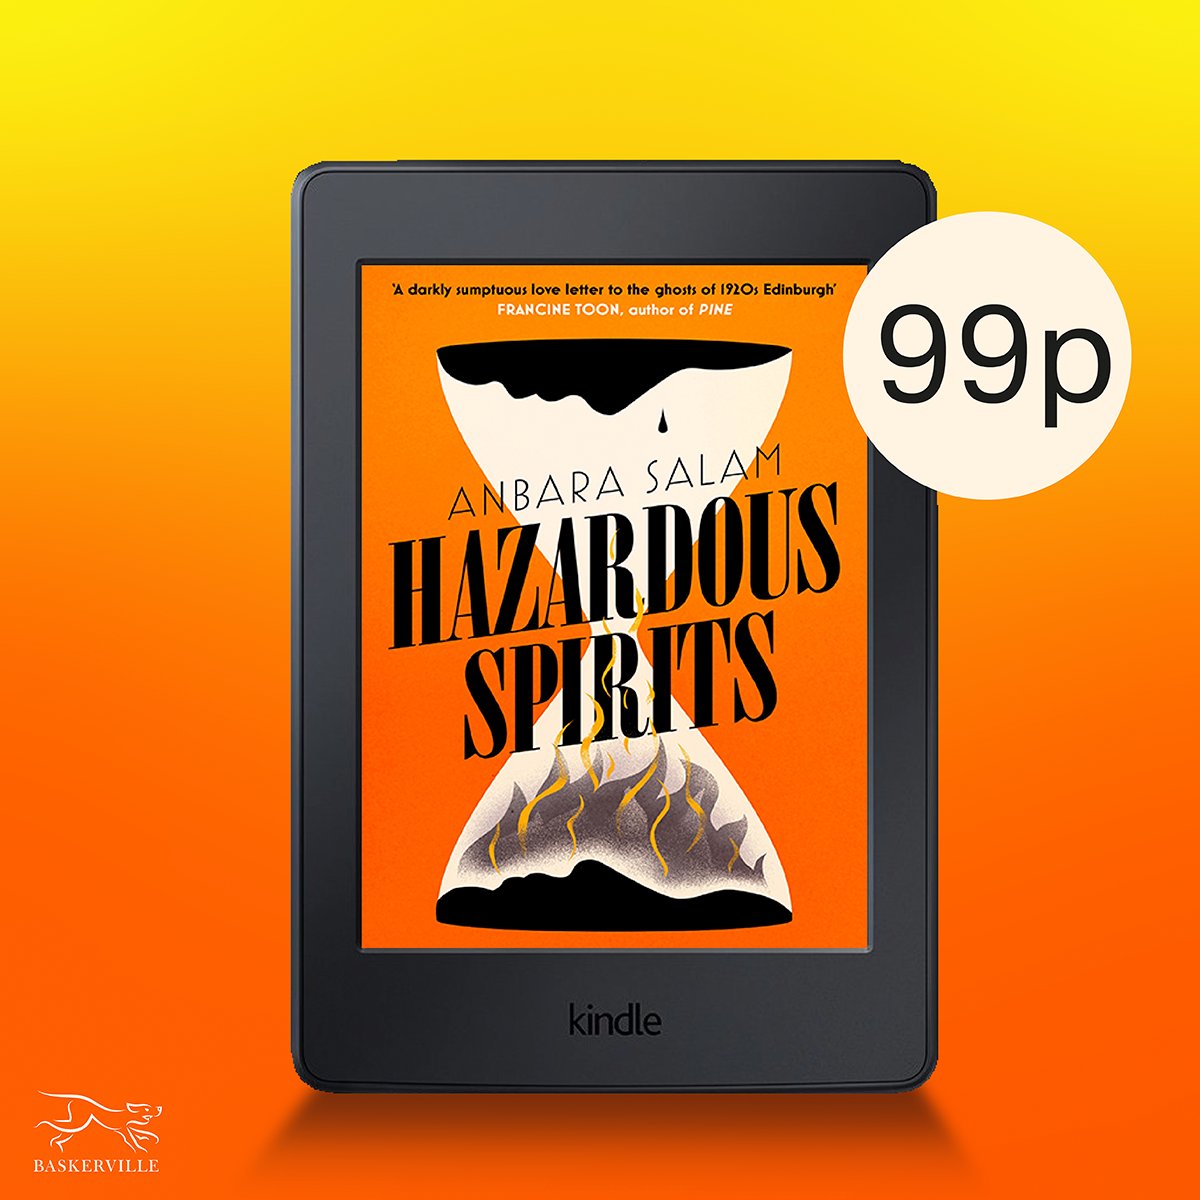 🔥 Kindle Deal Alert 🔥 HAZARDOUS SPIRITS is available for only 99p on your Kindle throughout April! Set in 1920s Edinburgh, @anbara_salam's stunning gothic mystery will whisk you away to a world of seances and spiritualism. ⏳🕯️ Available here: amazon.co.uk/Hazardous-Spir…